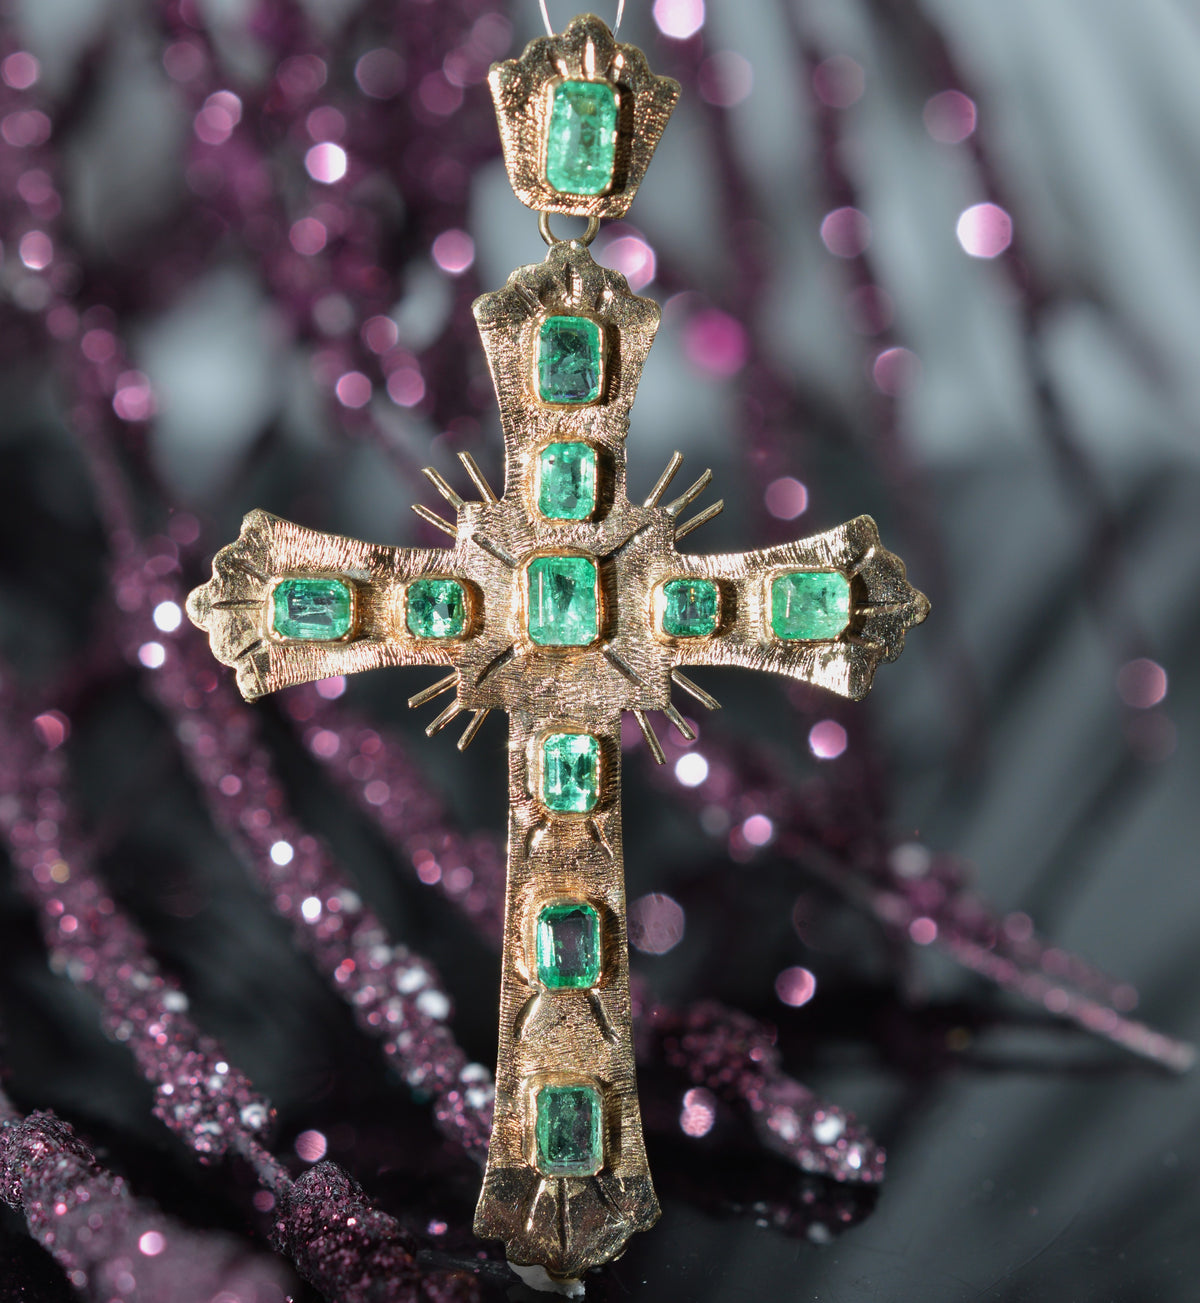 18K Yellow Gold Antique Style Cross Pendant With 11 Emerald Cut Emeralds